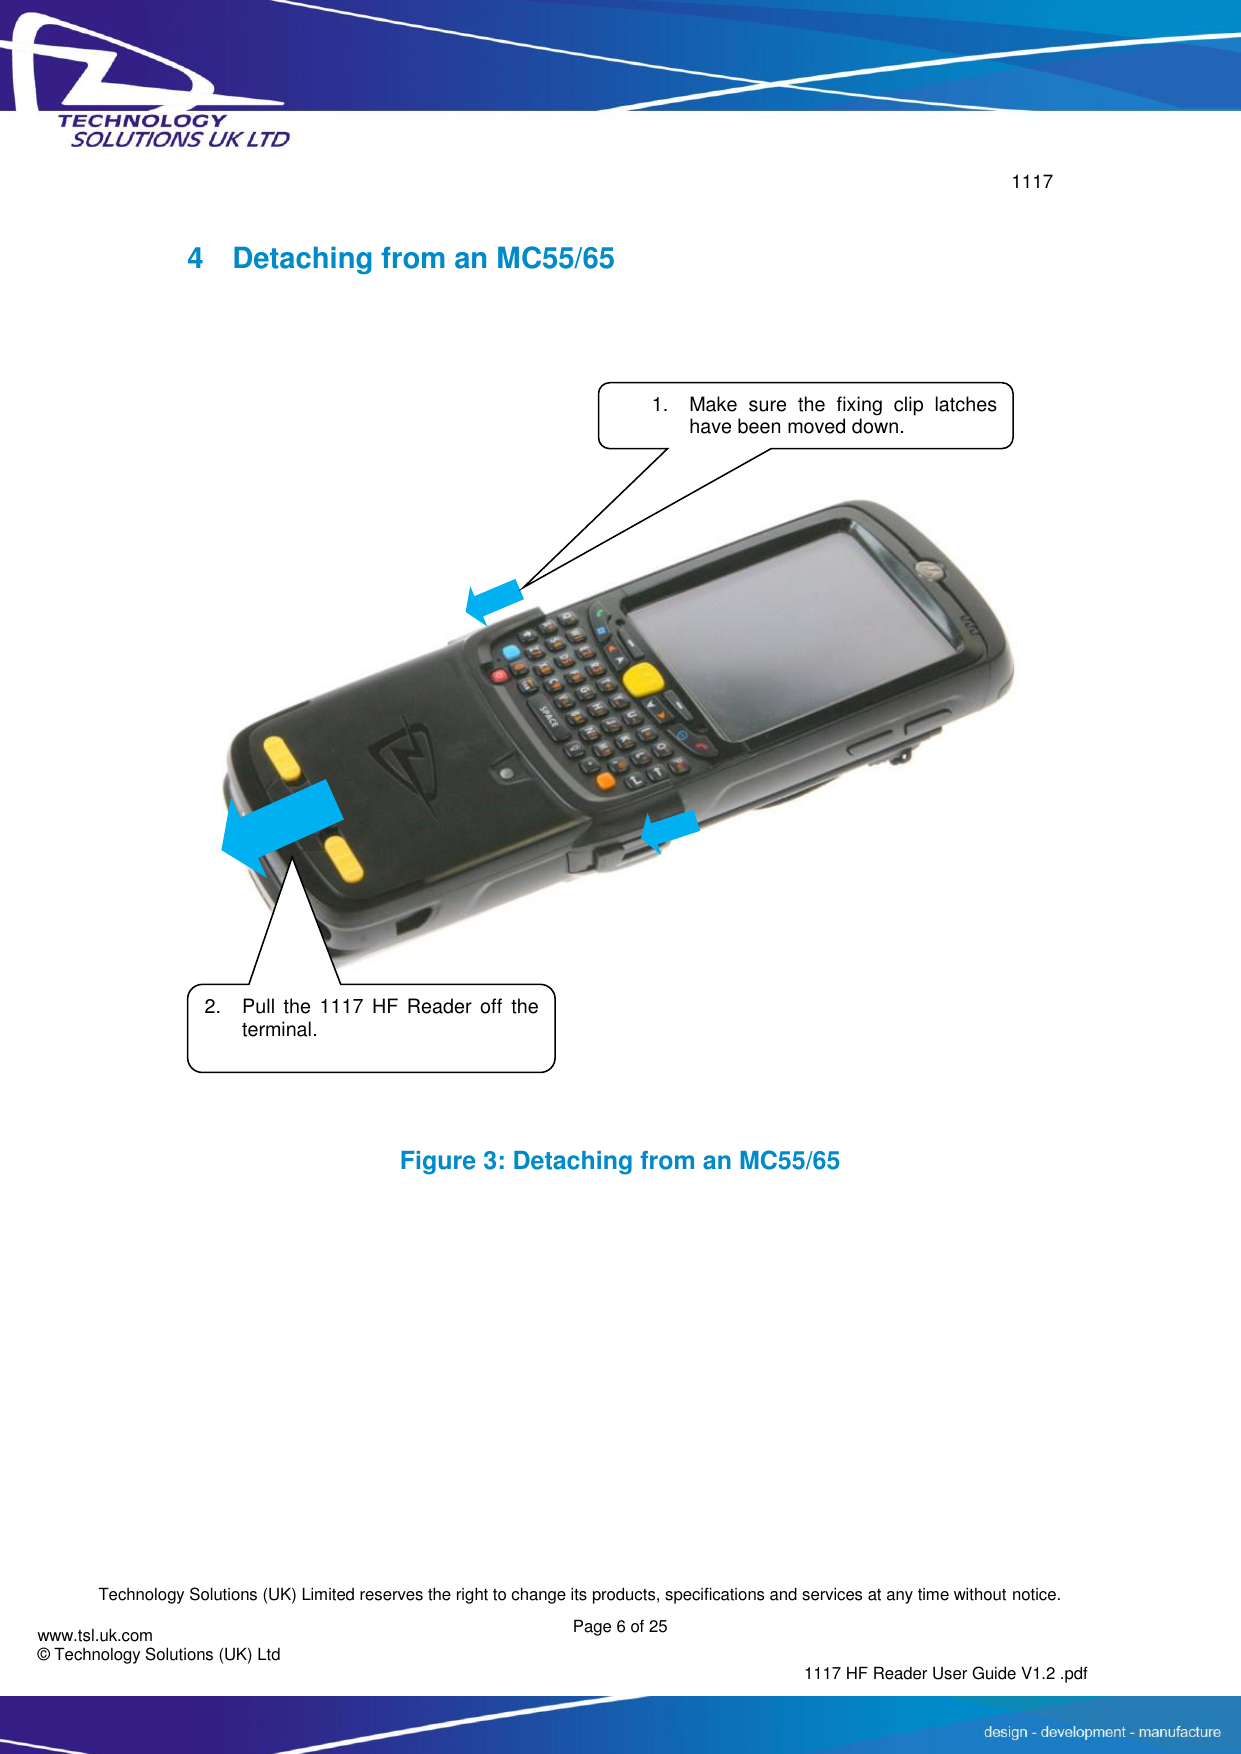        1117  Technology Solutions (UK) Limited reserves the right to change its products, specifications and services at any time without notice. Page 6 of 25 1117 HF Reader User Guide V1.2 .pdf www.tsl.uk.com © Technology Solutions (UK) Ltd   4  Detaching from an MC55/65    Figure 3: Detaching from an MC55/65 1. Make  sure  the  fixing  clip  latches have been moved down. 2. Pull  the  1117  HF  Reader  off the terminal.  